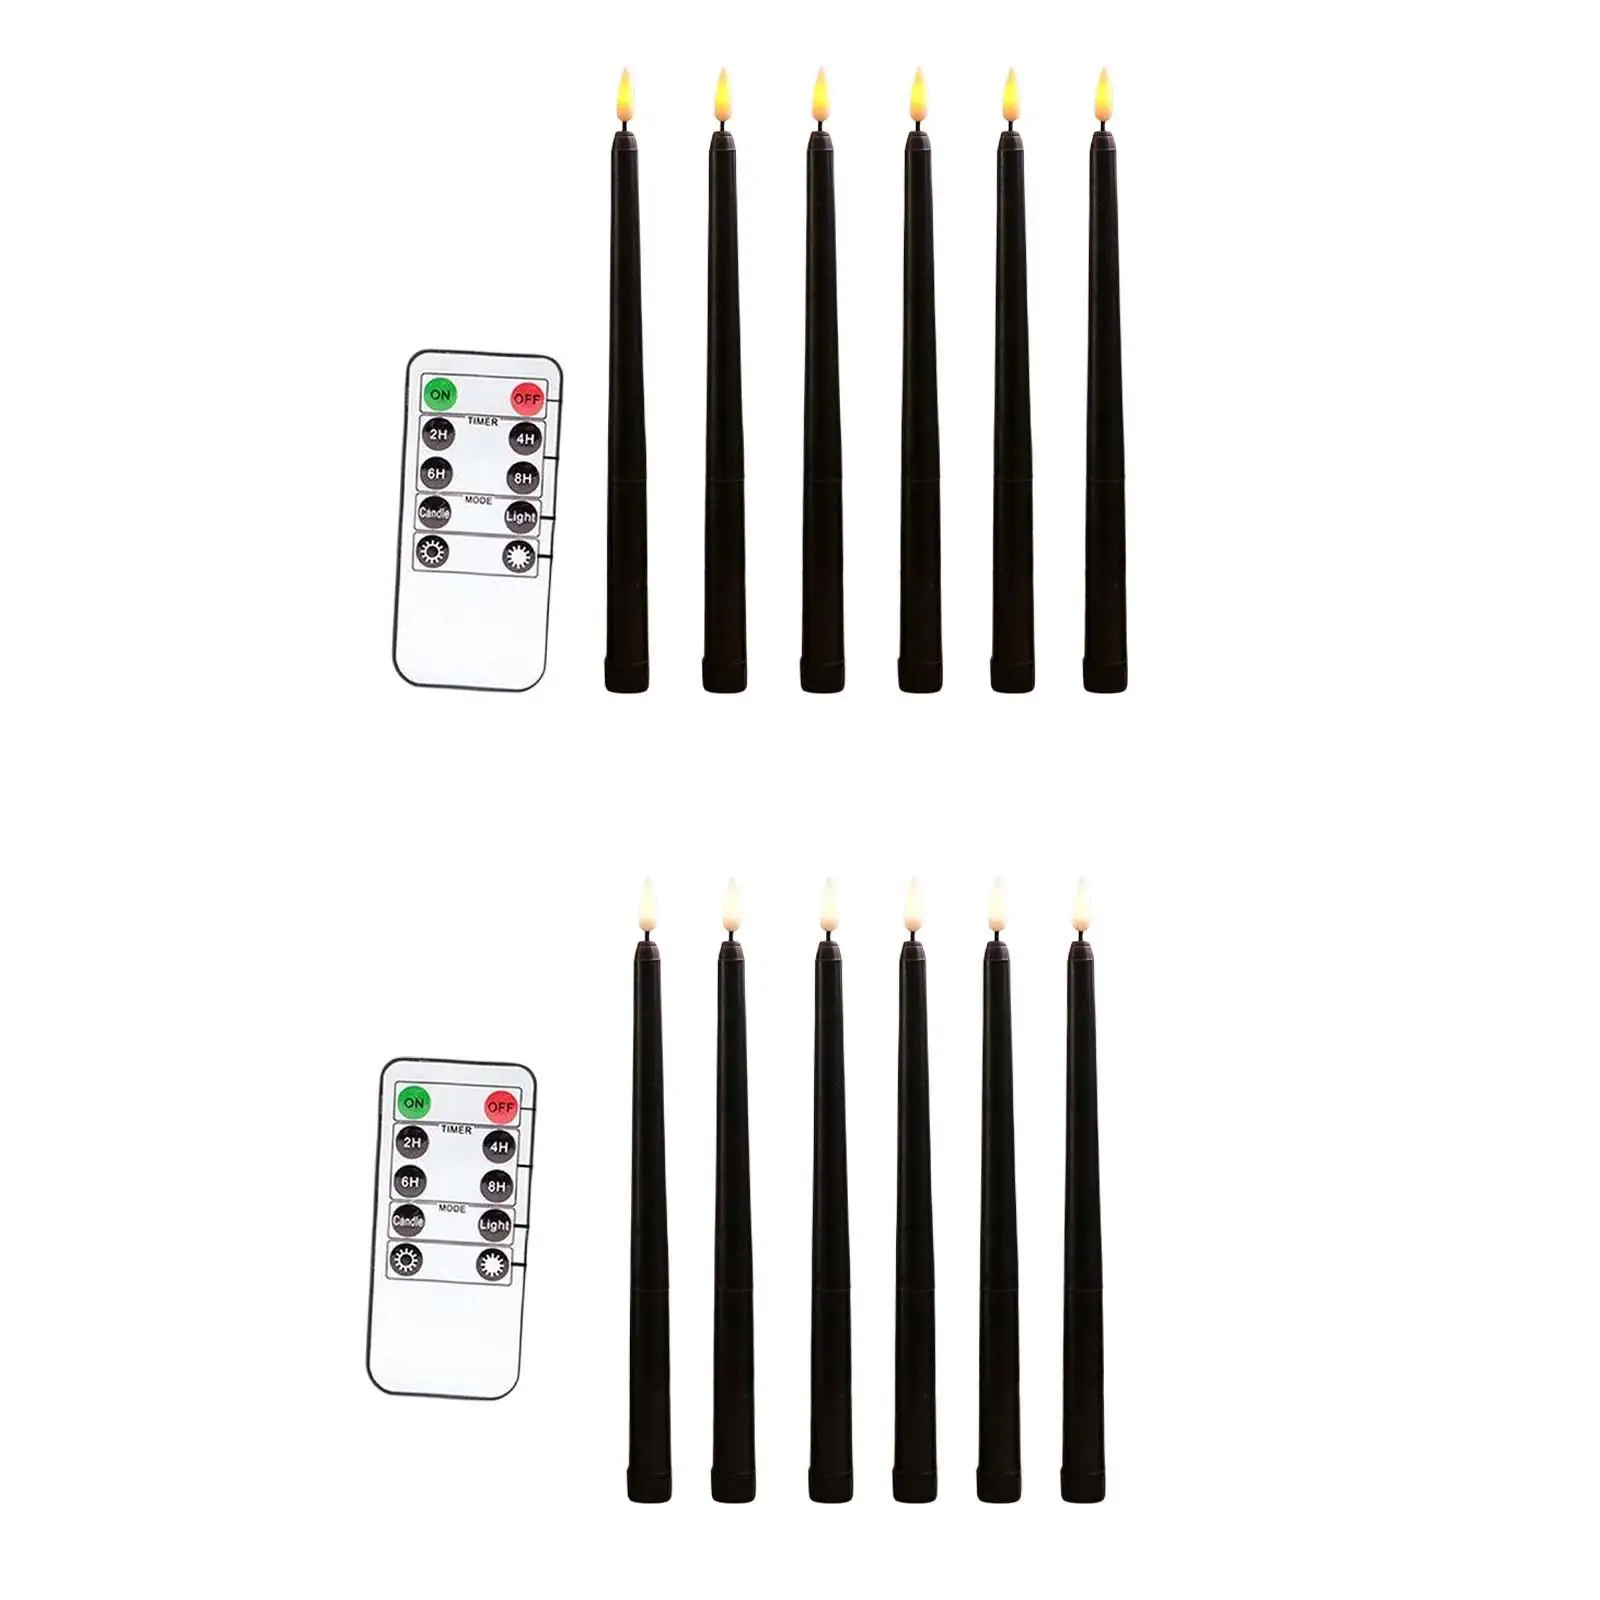 6Pcs Realistic LED Tapered Candles Flameless Taper Candle Timer Window Candles for Wedding Christmas Decoration Festival Holiday